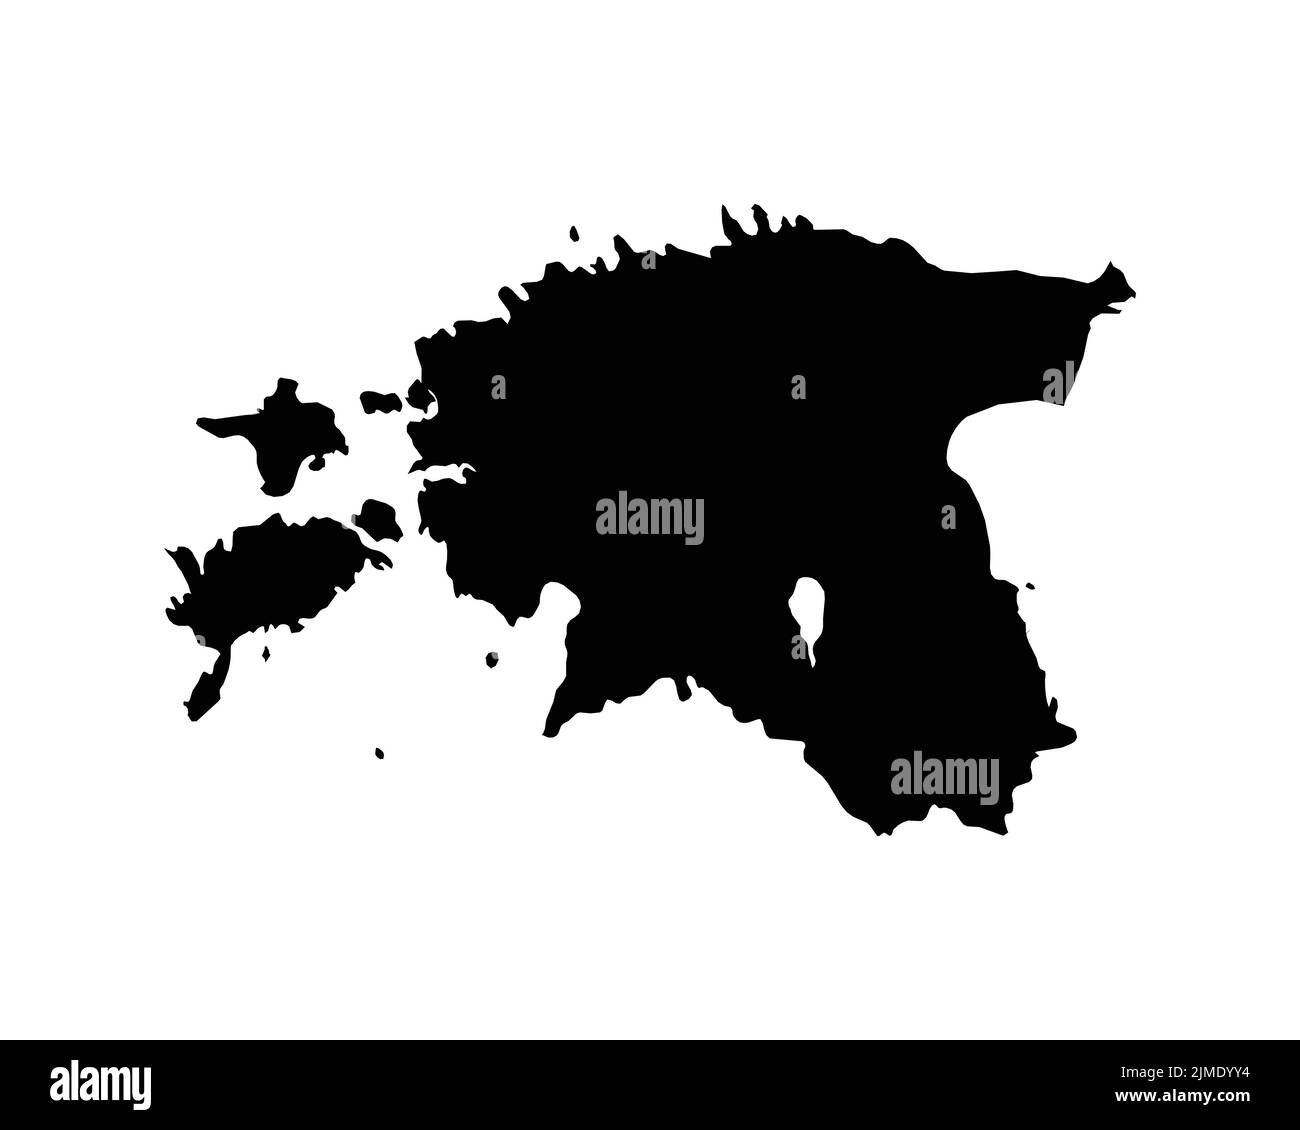 Estonia Map. Estonian Country Map. Black and White National Nation Outline Geography Border Boundary Shape Territory Vector Illustration EPS Clipart Stock Vector